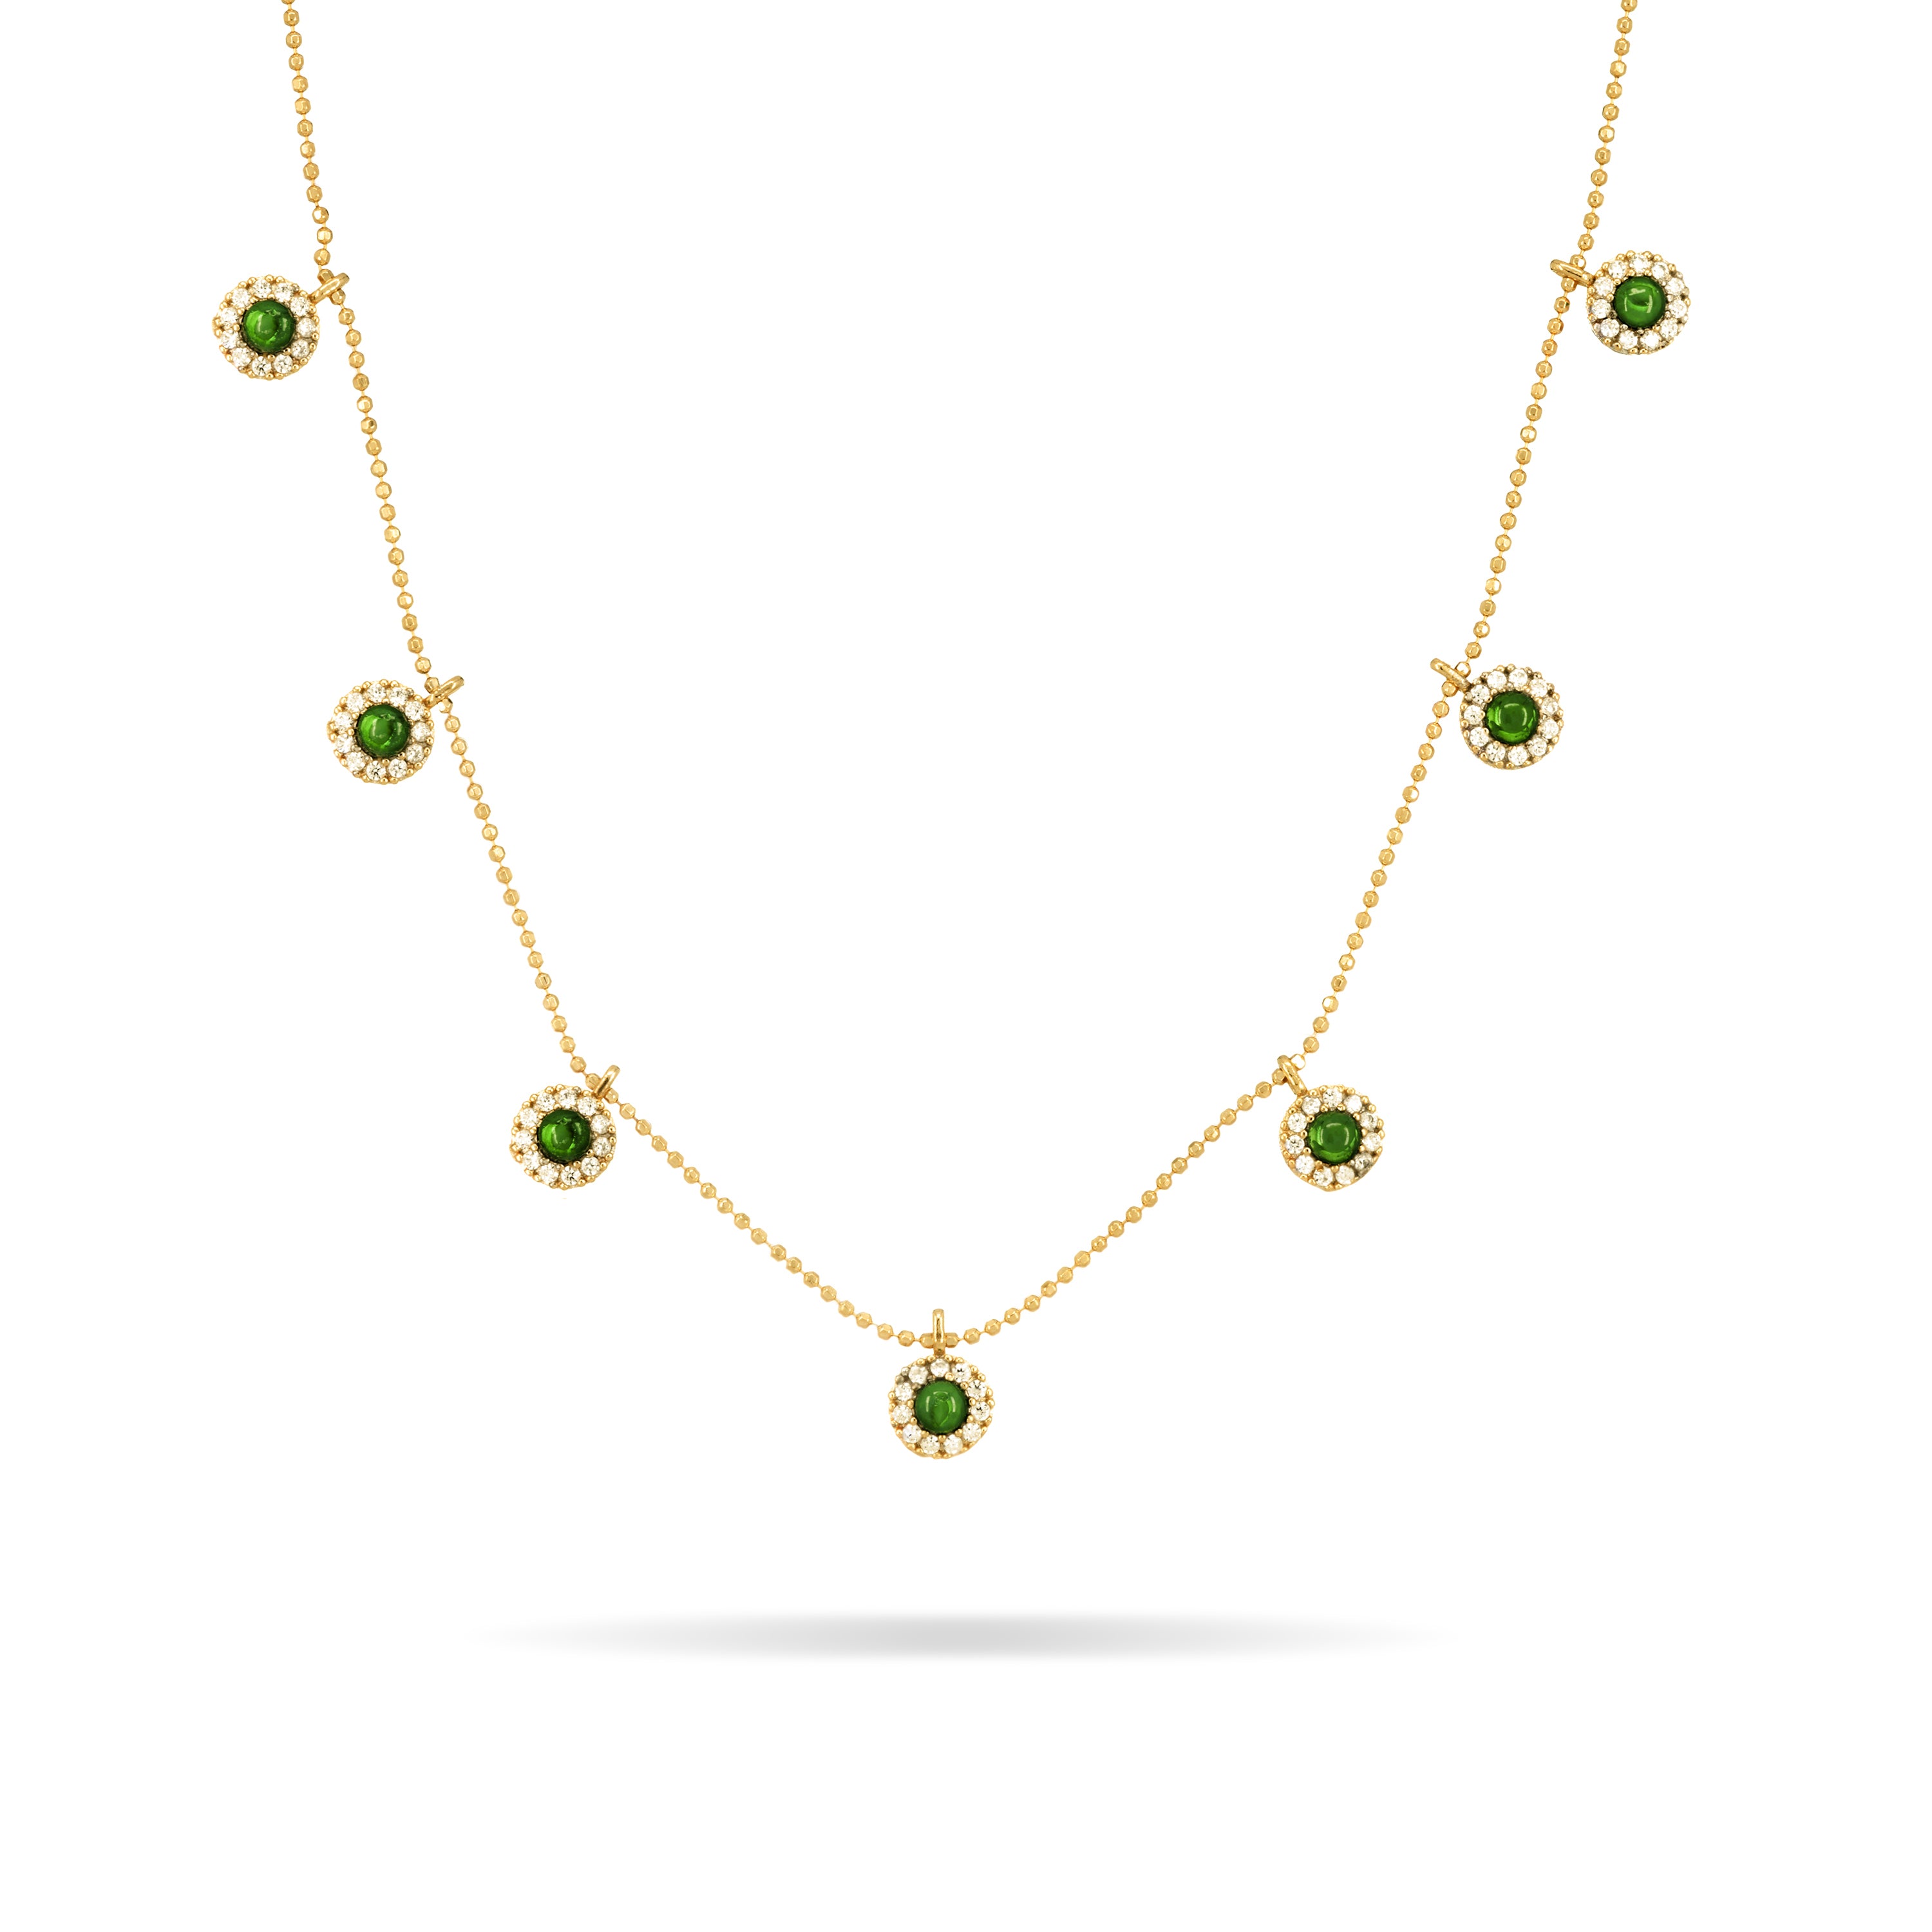 Round Droplets Link Chain Necklace